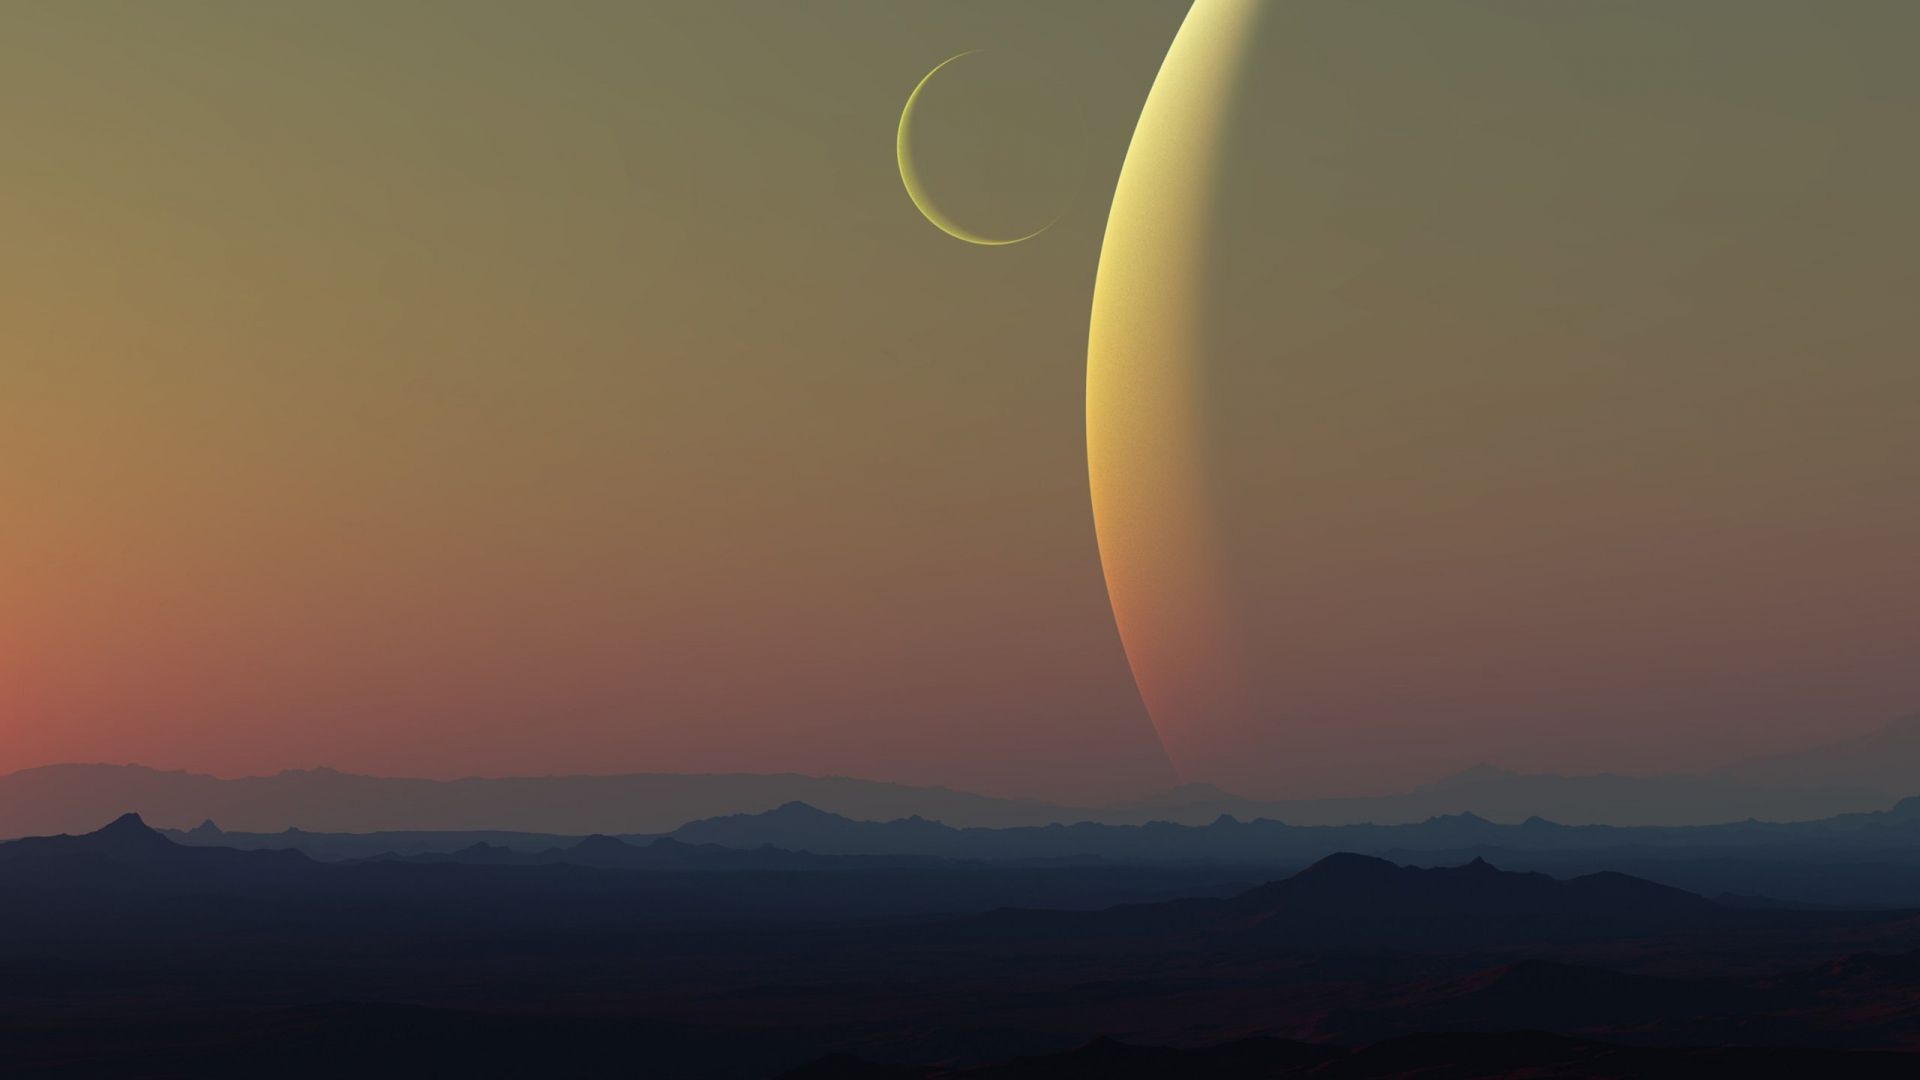 Another Planet Sunset Wallpapers